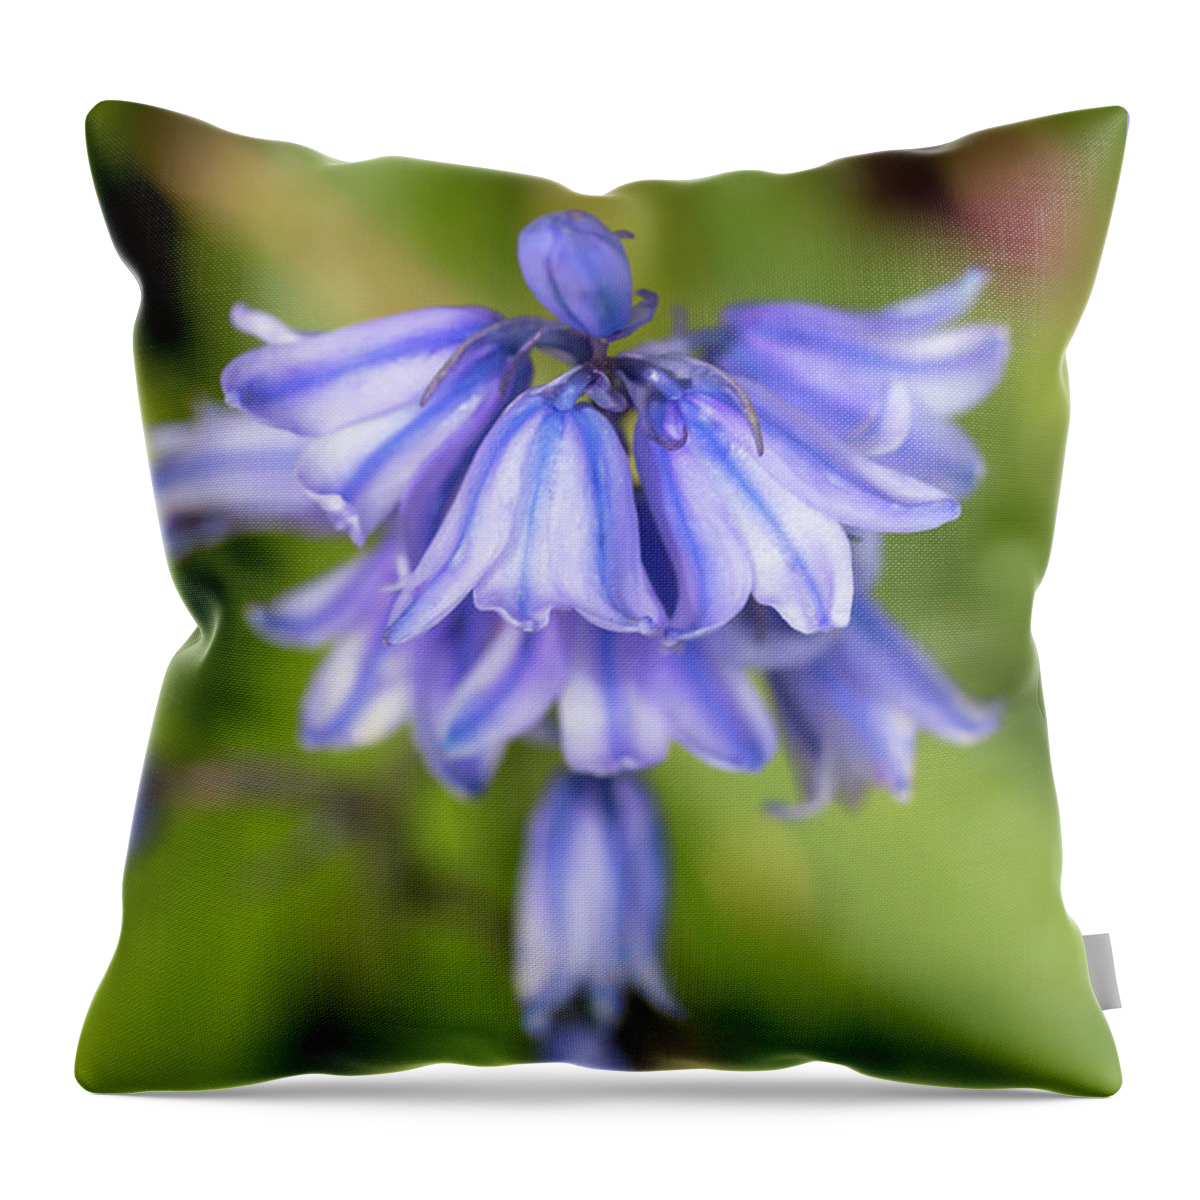 Flower Throw Pillow featuring the photograph Spanish Bluebells 5 by Dawn Cavalieri